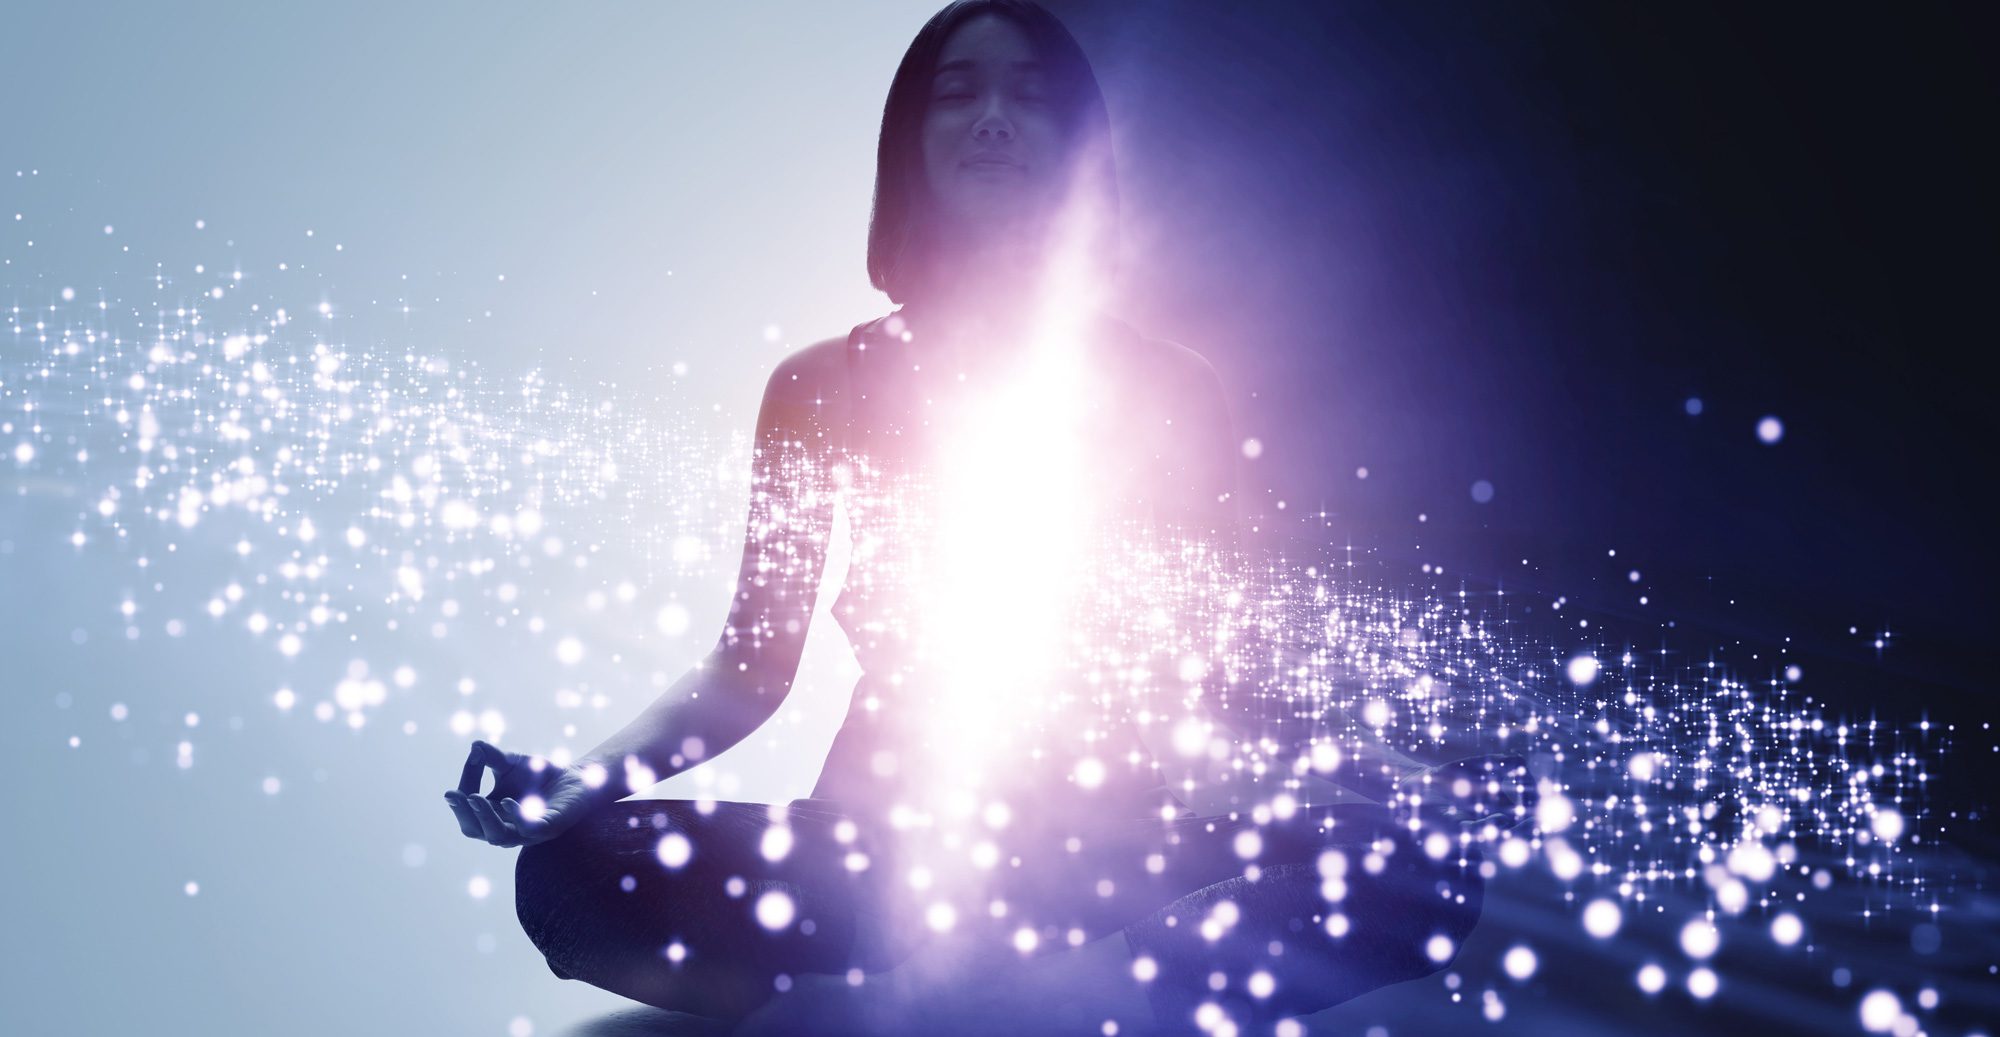  A person is sitting in a meditative pose with their eyes closed while sparkles of light surround them.